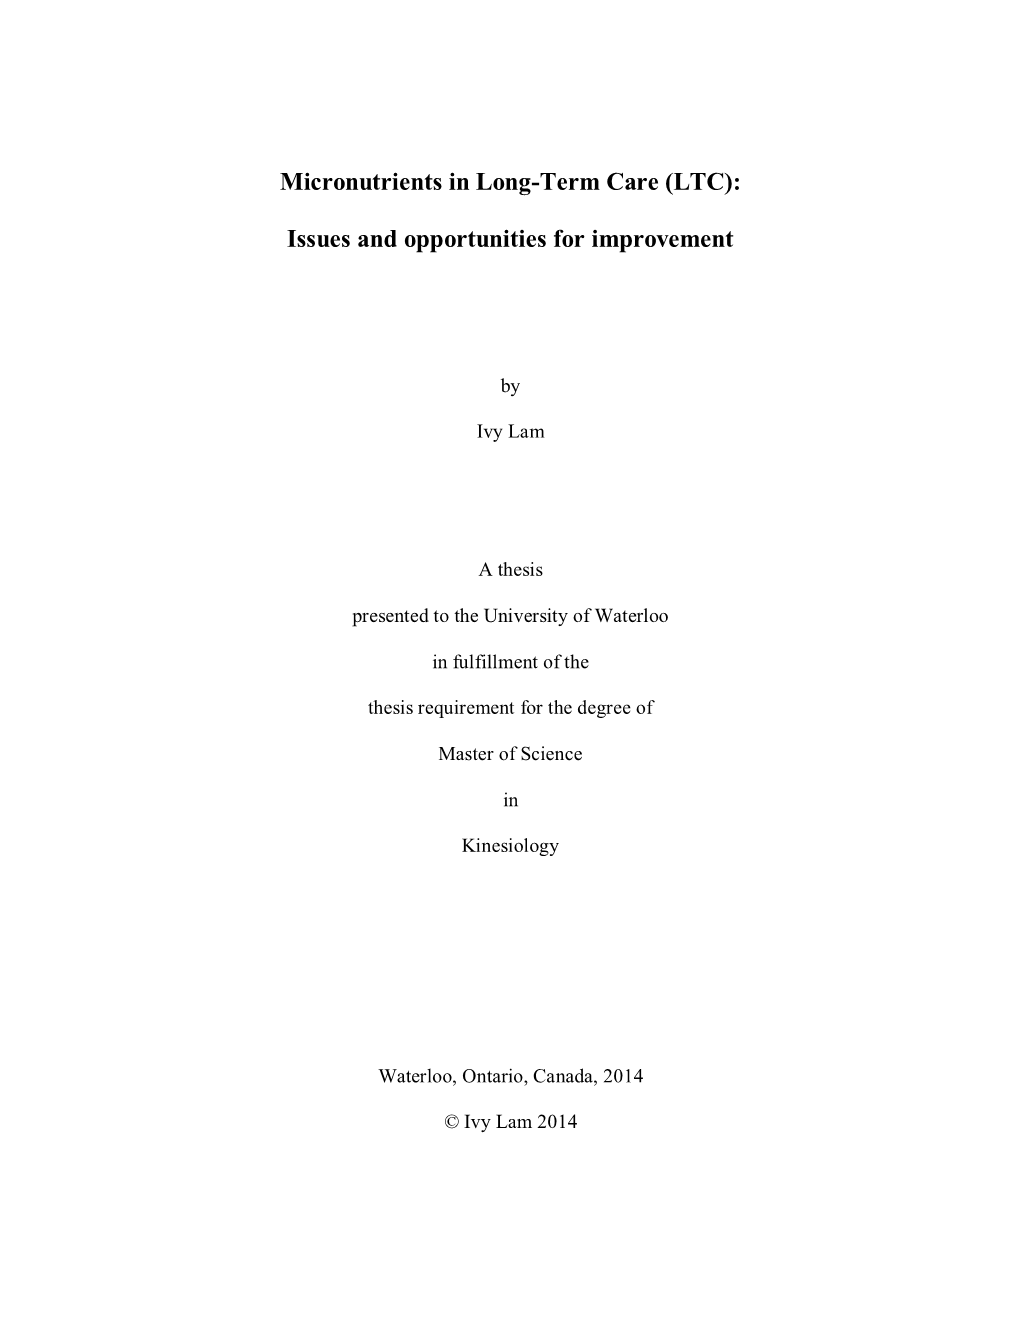 Micronutrients in Long-Term Care (LTC): Issues and Opportunities For